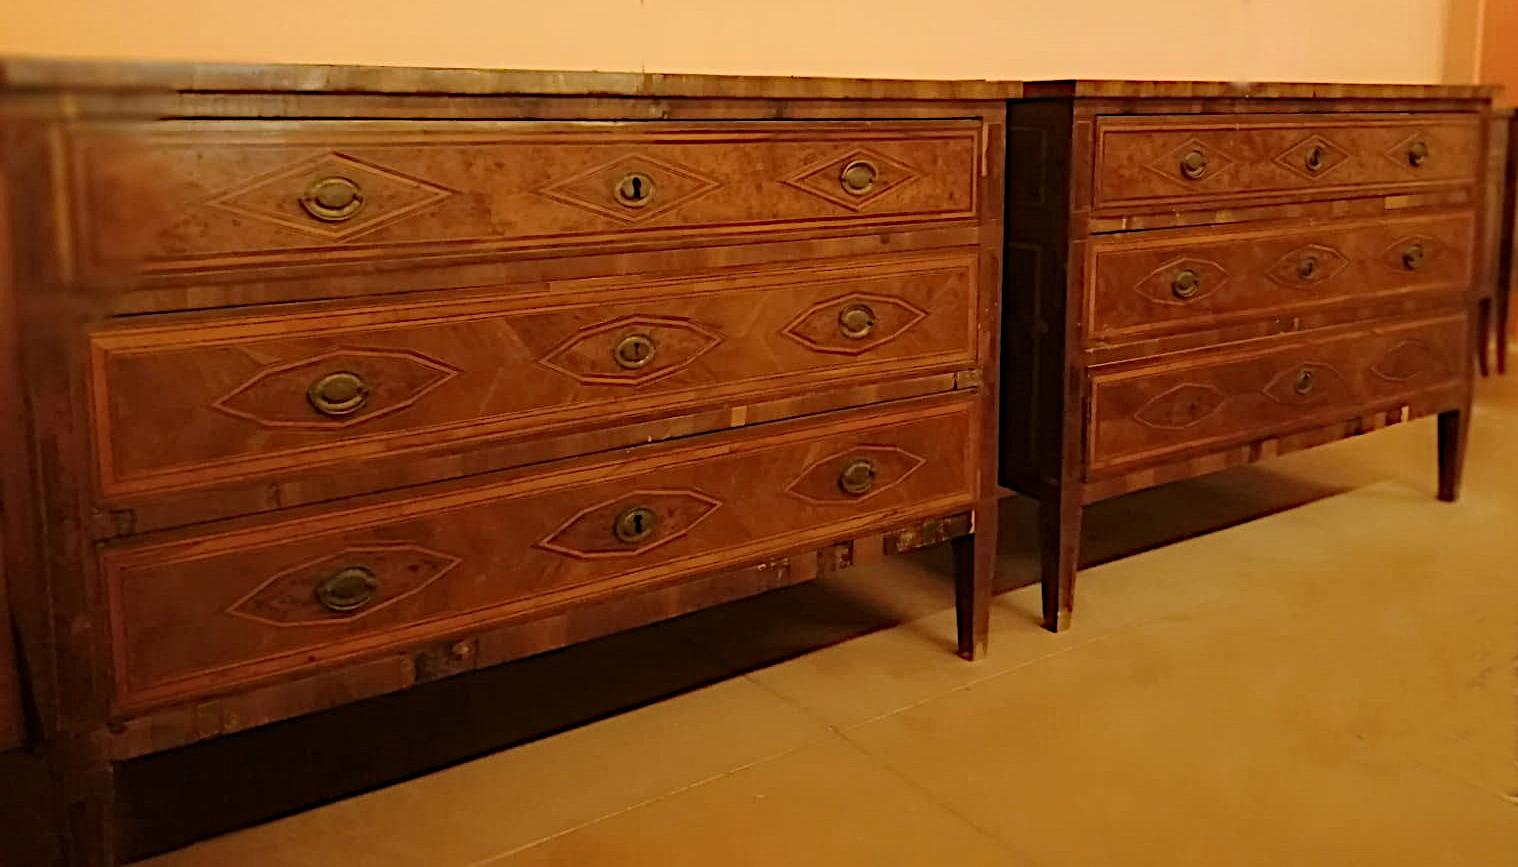 Pair of Louis XVI dressers (last years of 1700),
entirely panelled in various essences (walnut, walnut burl, maple and ebony).

Original in all their parts, never restored.
Provenance Italy (Veneto Region)

The structure is in good condition, a